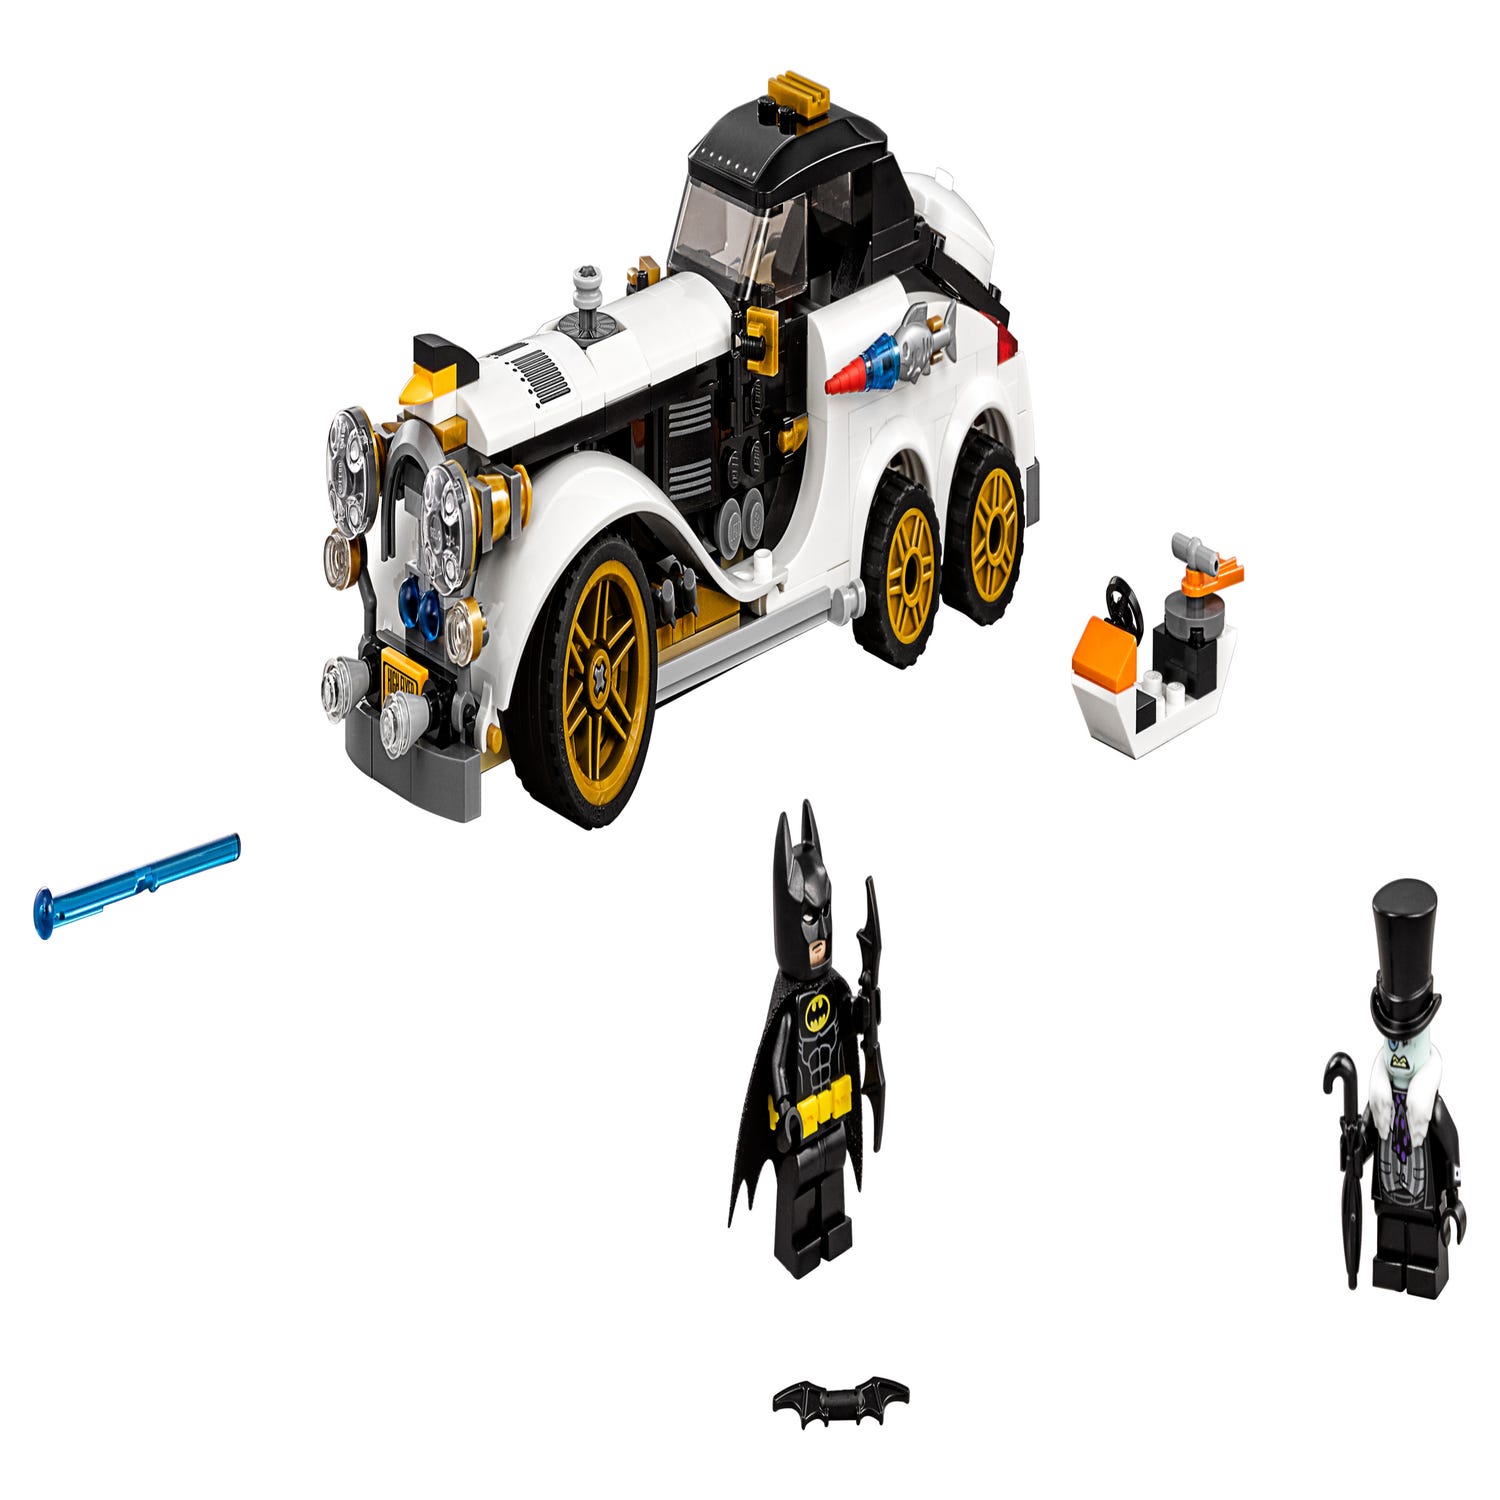 The Penguin™ Arctic Roller 70911 THE LEGO® BATMAN MOVIE online at the Official LEGO® Shop US